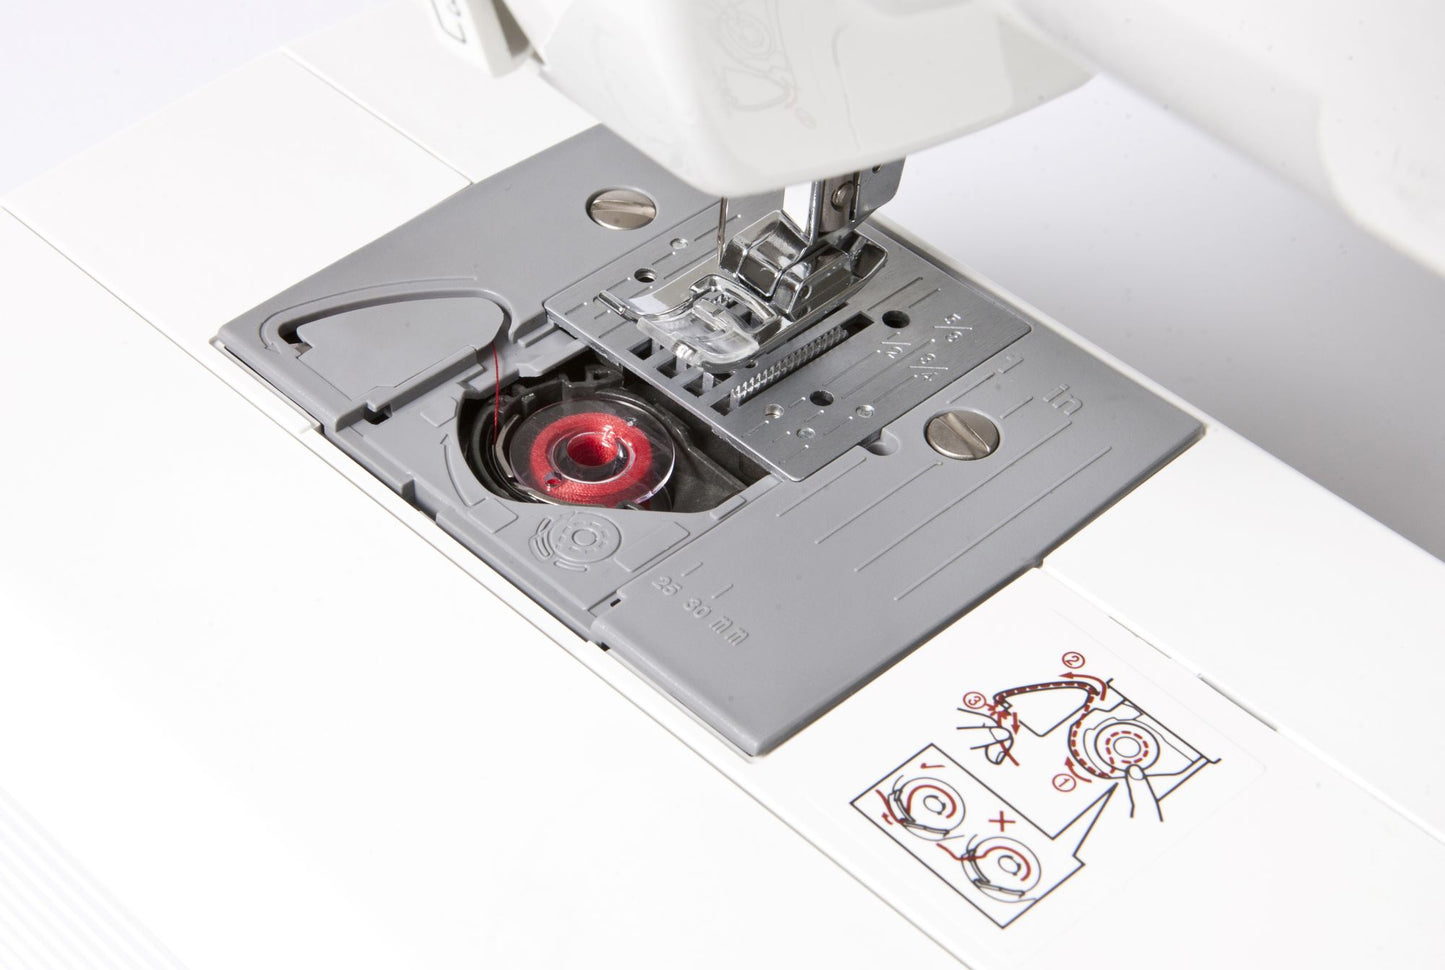 Brother XR37NT Sewing Machine